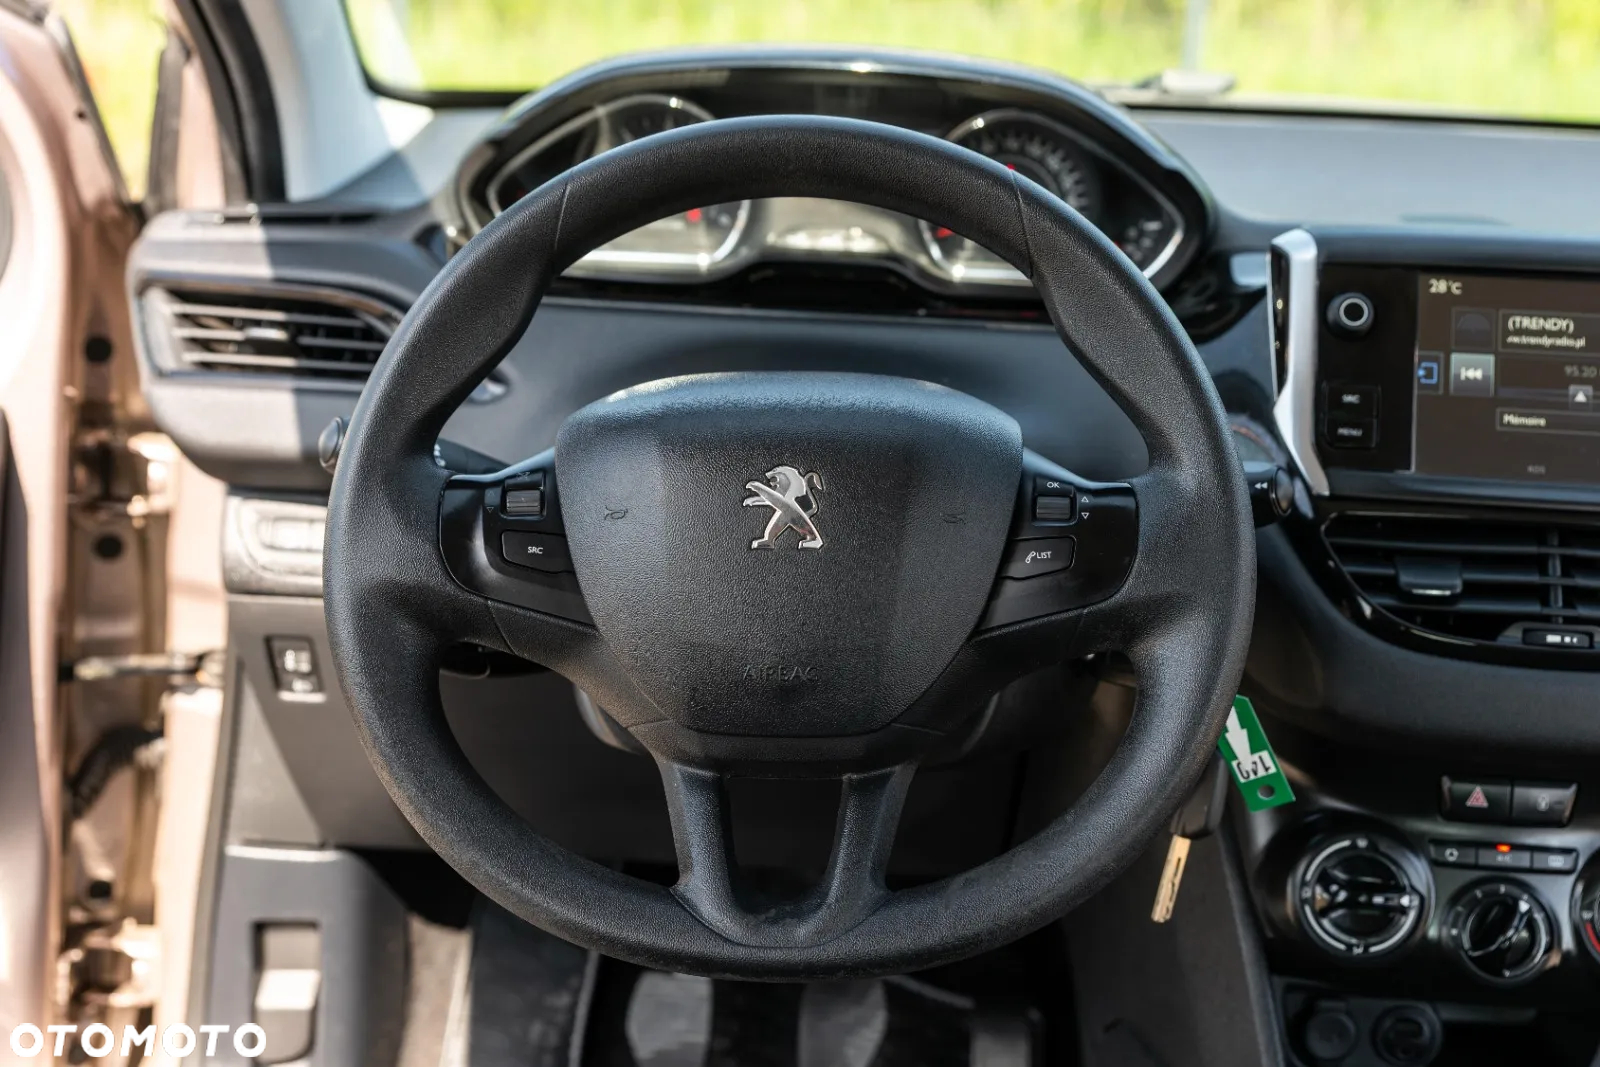 Peugeot 208 1.4 HDi Business Line - 6